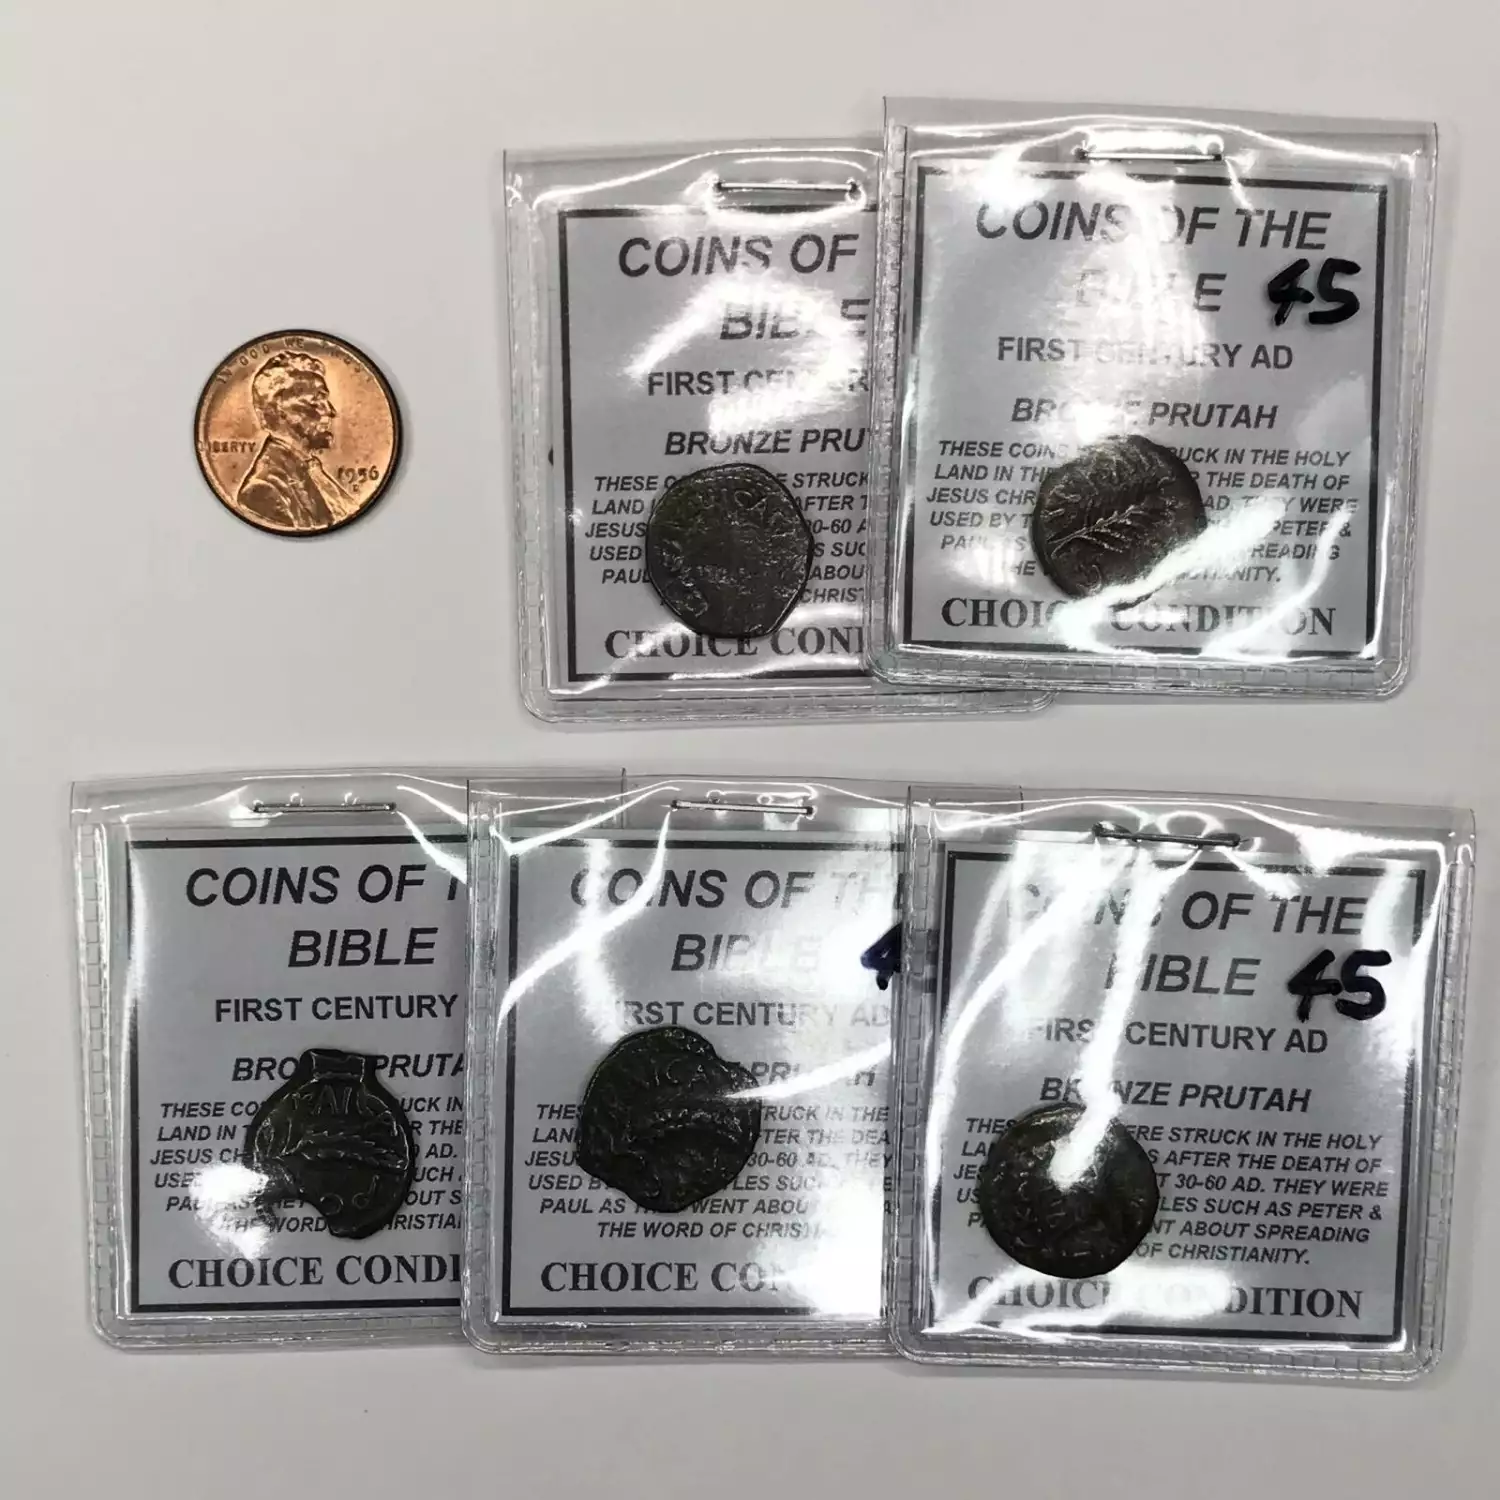 1st Century AD Bronze Prutah - Coins of the Bible (4)